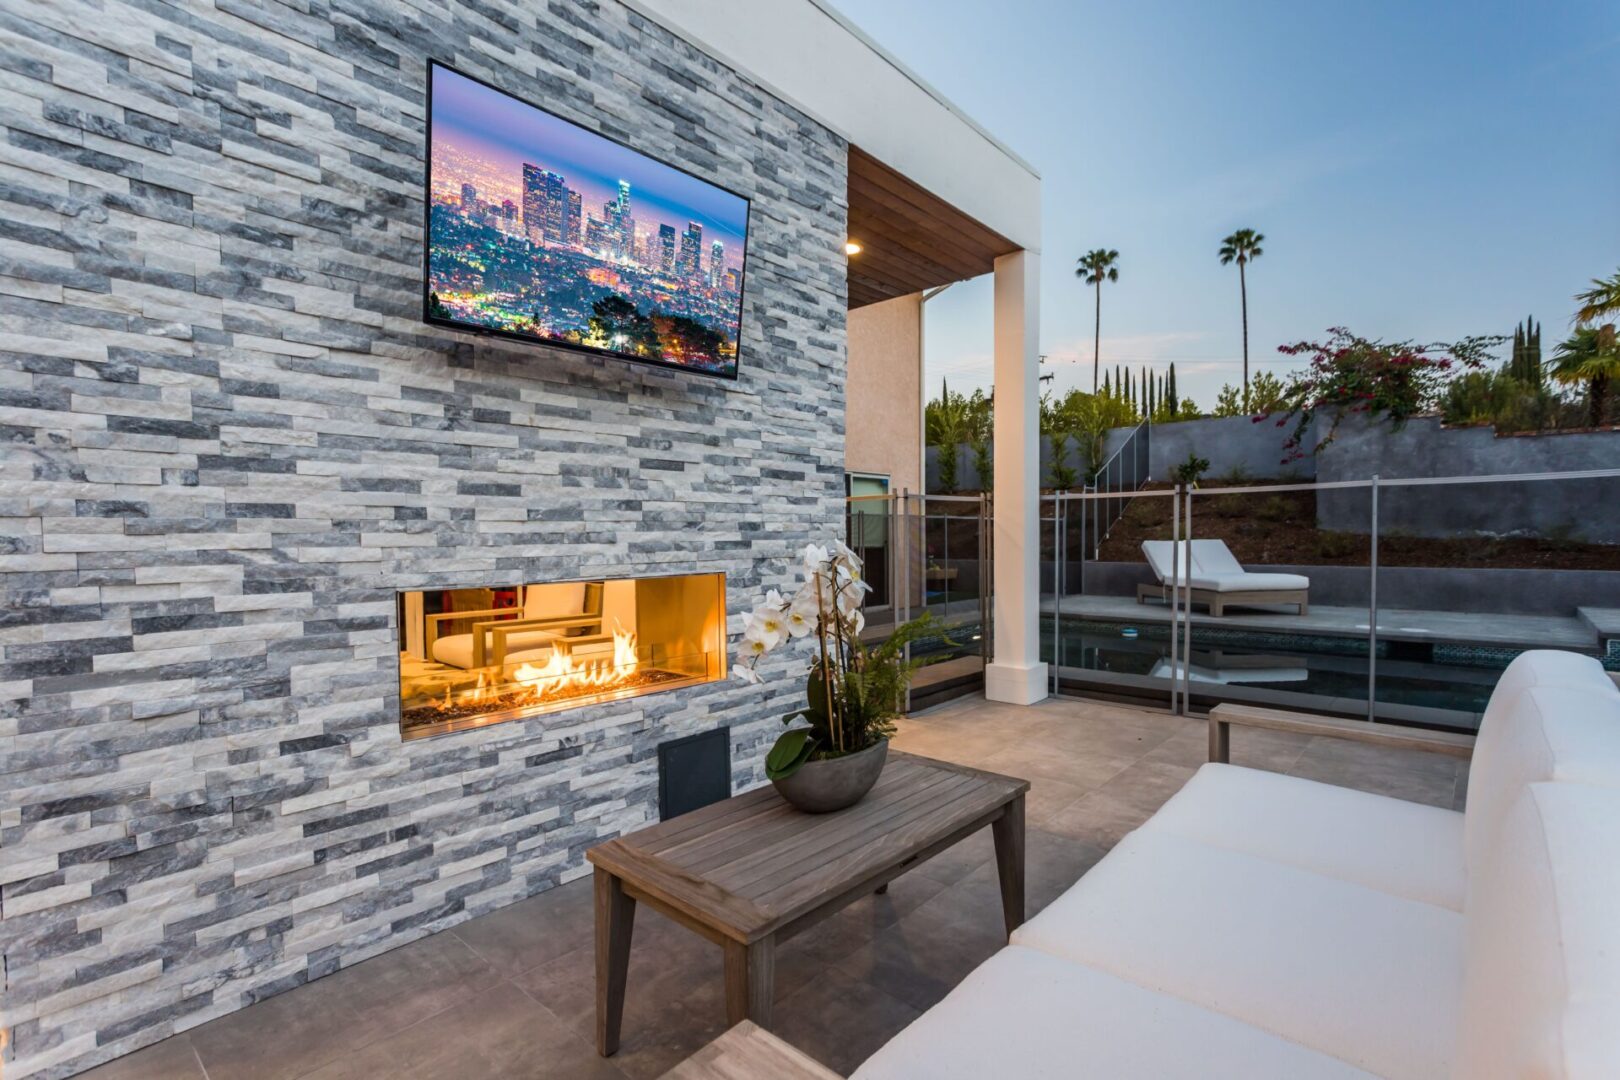 white couch and table with outdoor TV and fireplace